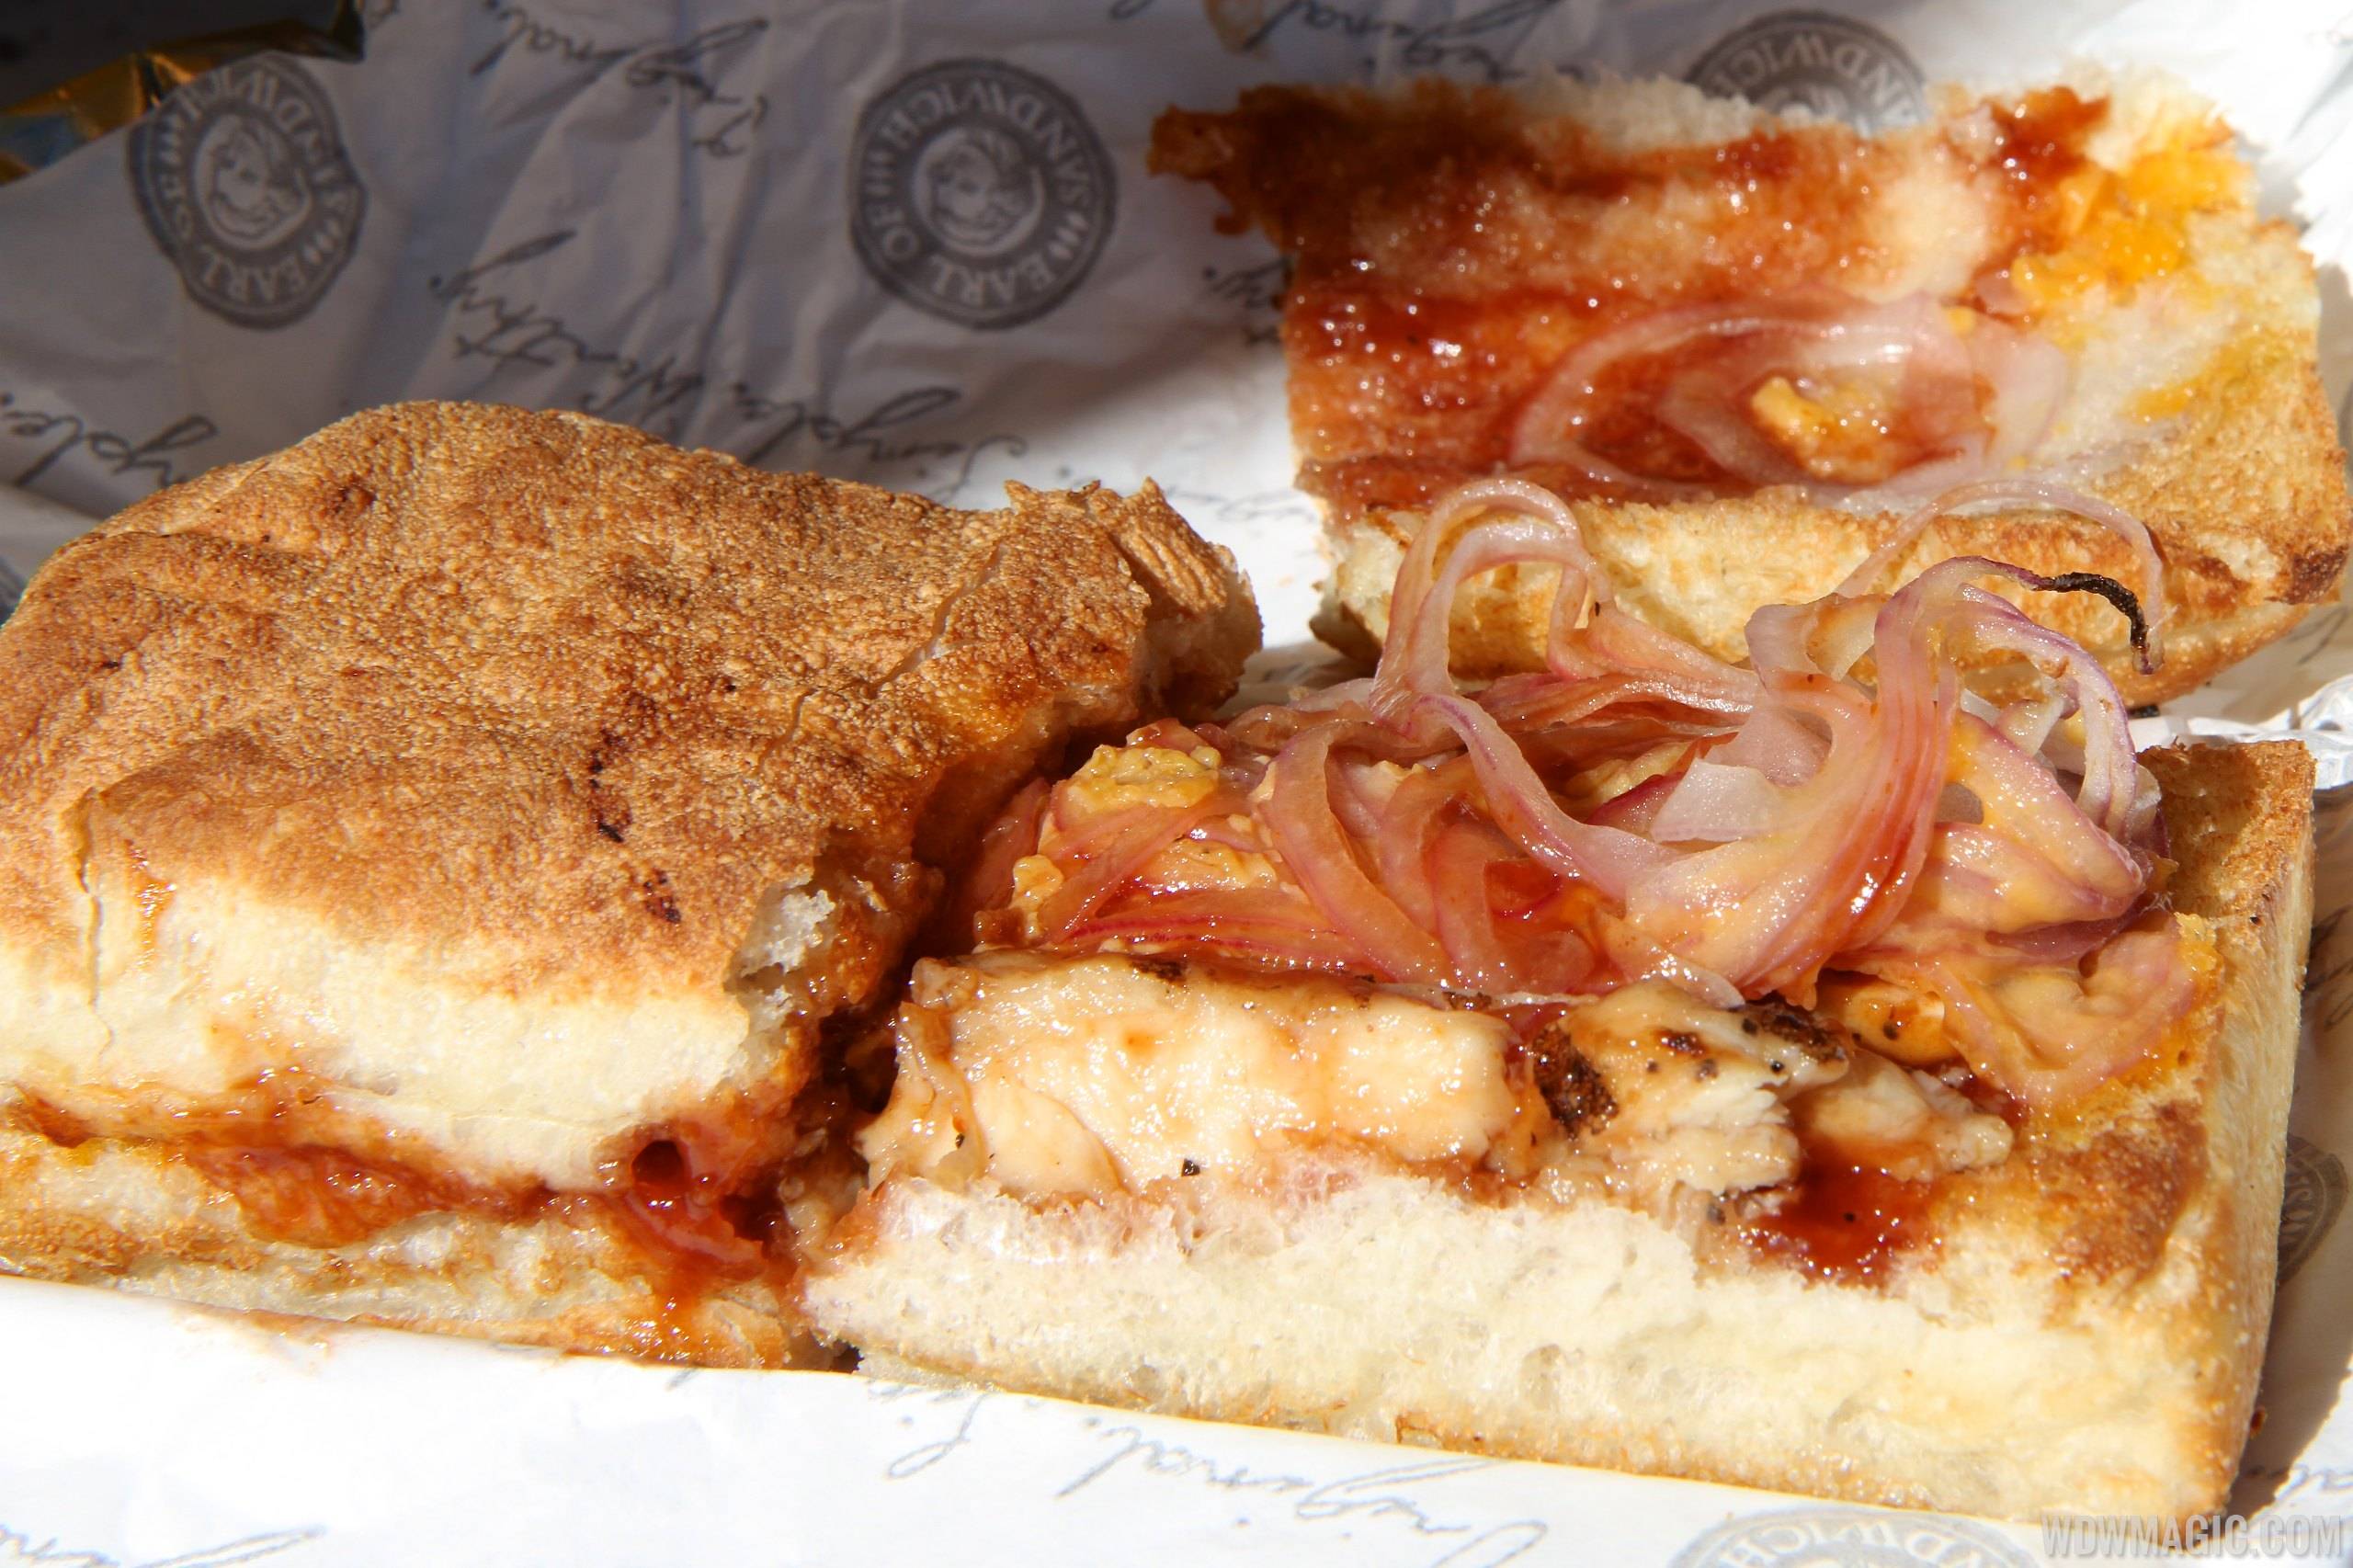 PHOTOS - Earl of Sandwich offers two new limited time sandwiches